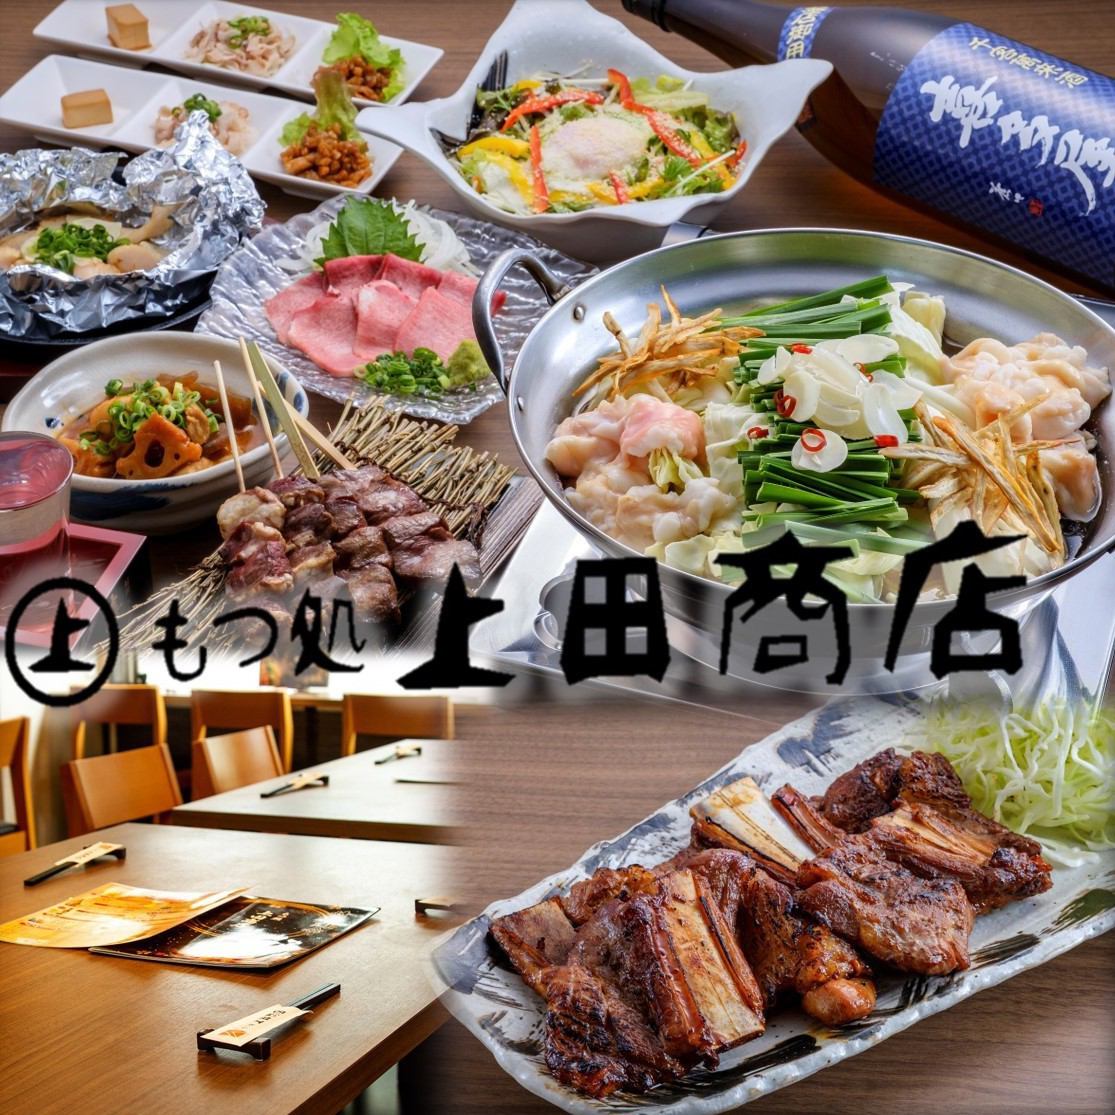 Directly manage meat wholesale! Enjoy high quality meat at a reasonable price ◇